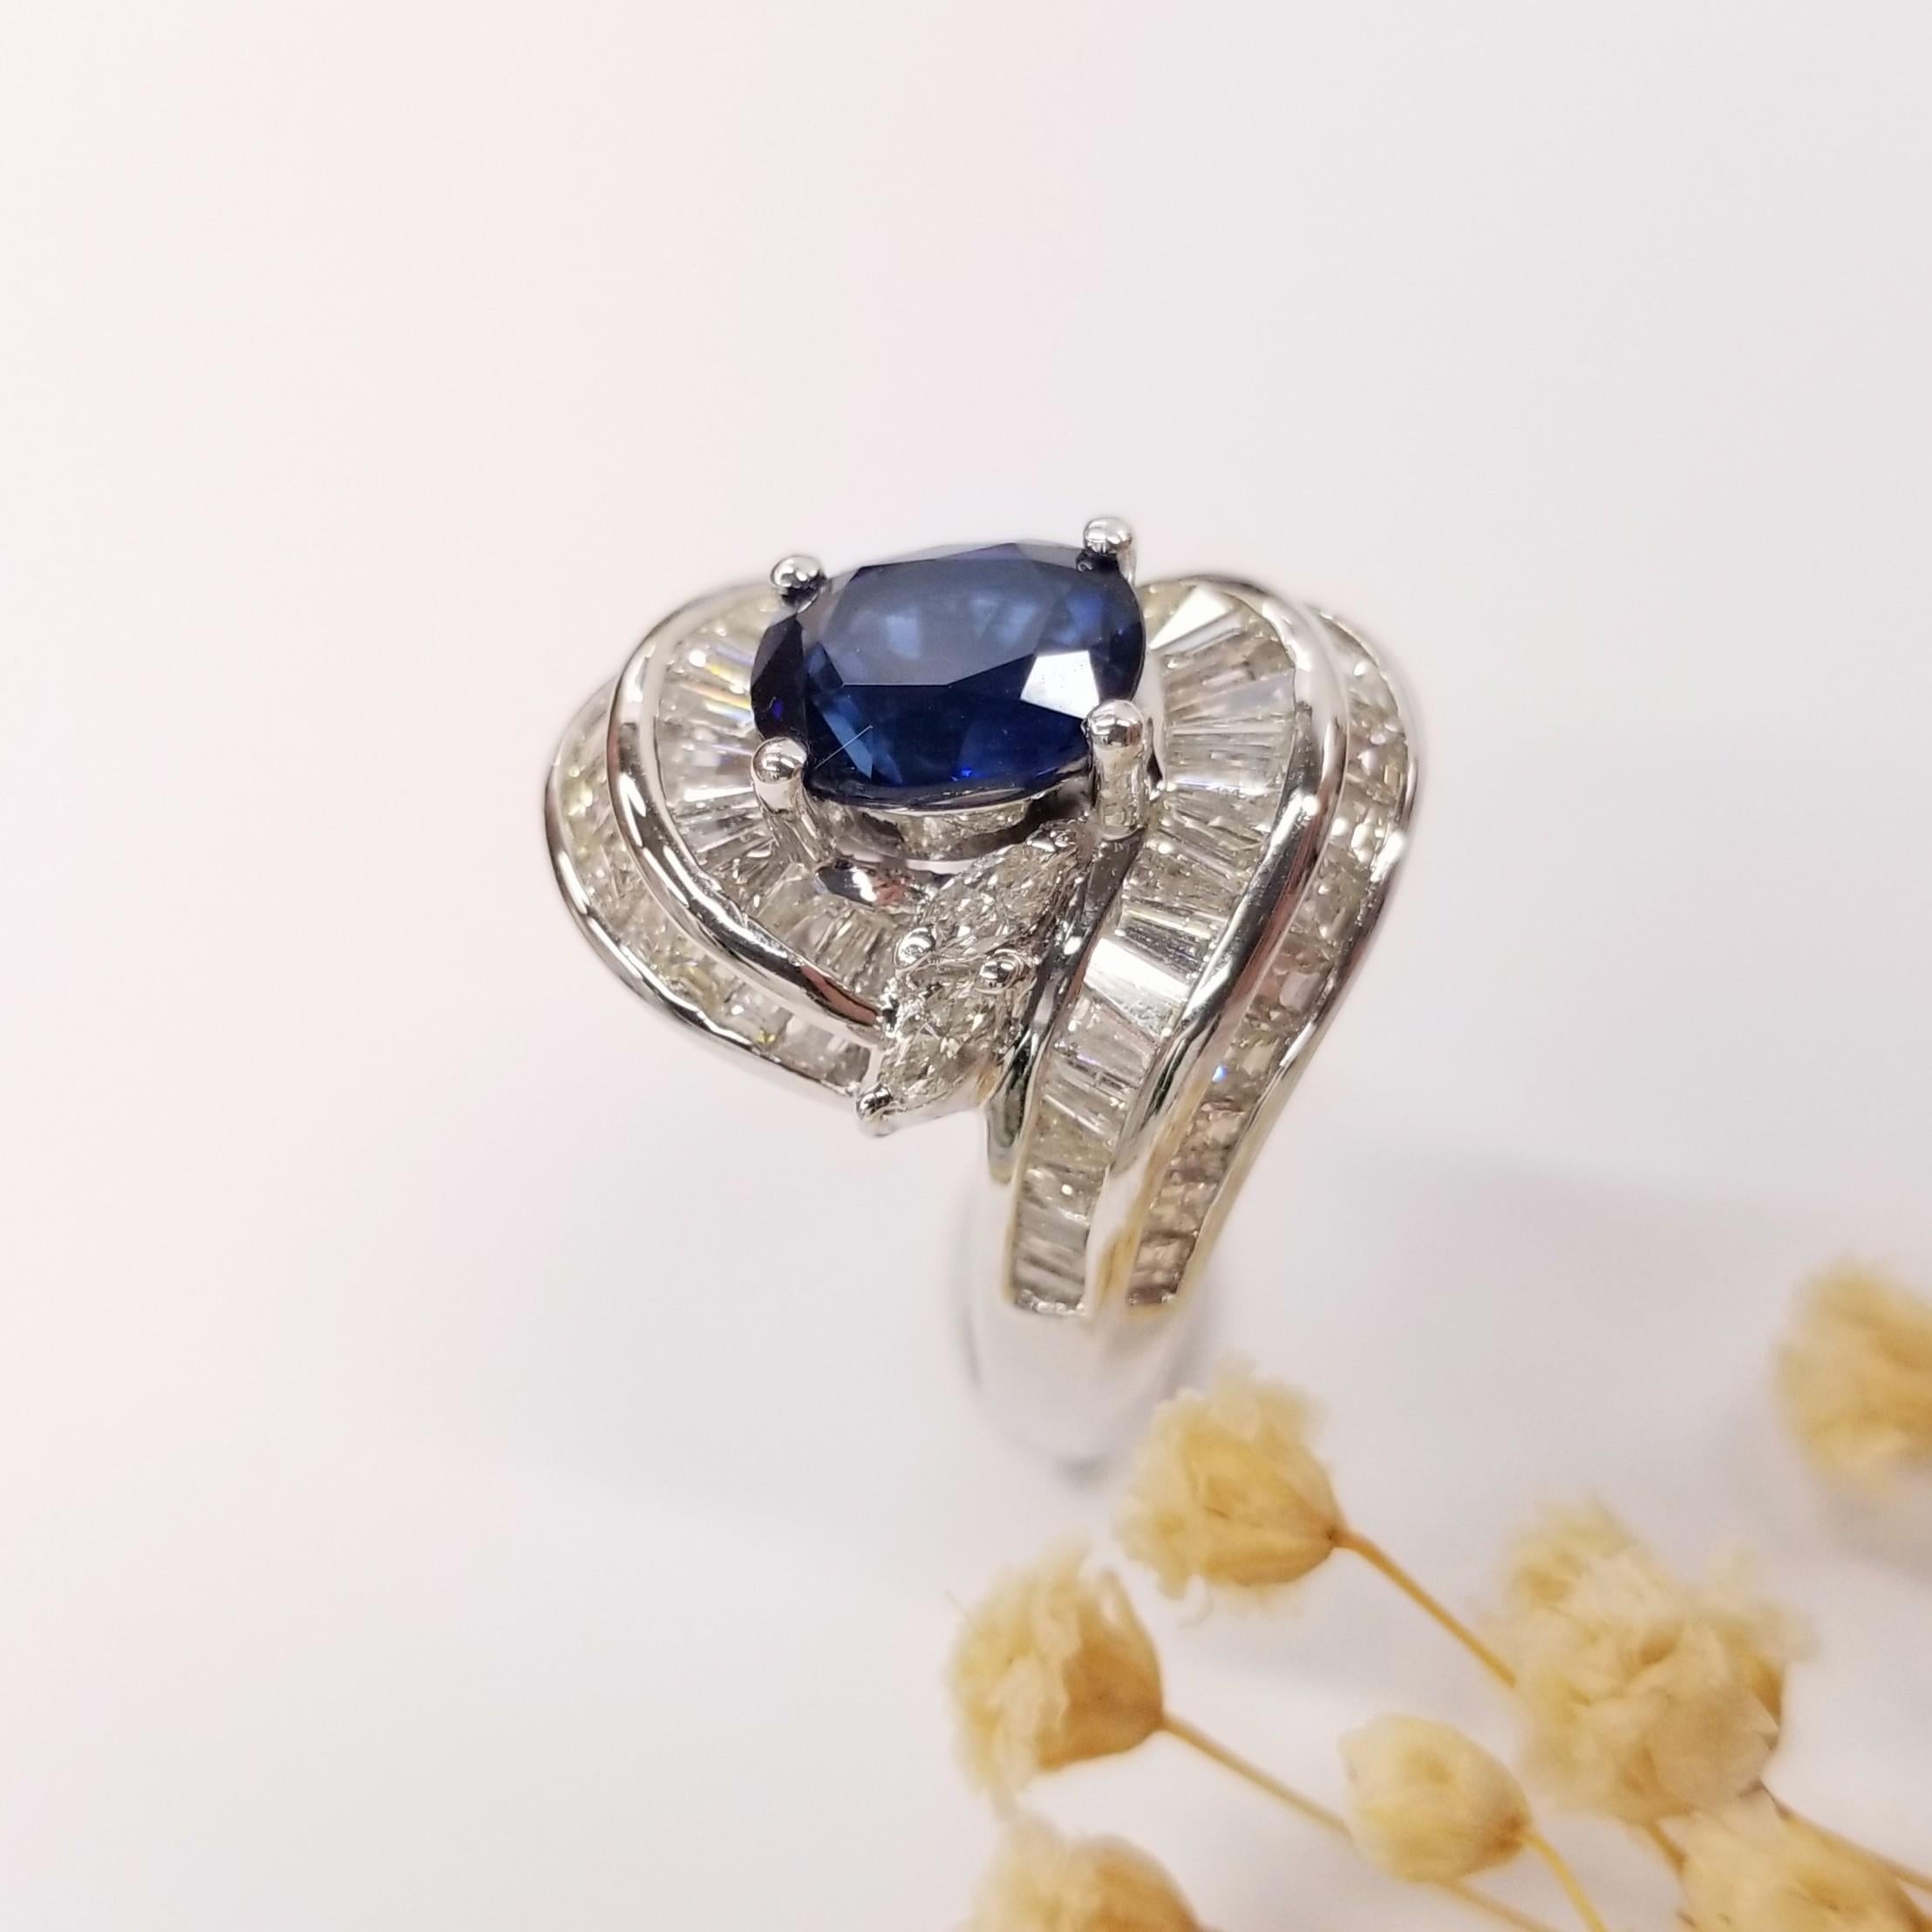 Indulge in the nostalgia and elegance of the 1990s with this exceptional vintage design swirl ring. Expertly crafted in 18K white gold, this ring showcases a stunning 2.78 carat vivid violetish blue sapphire in a captivating oval shape. The